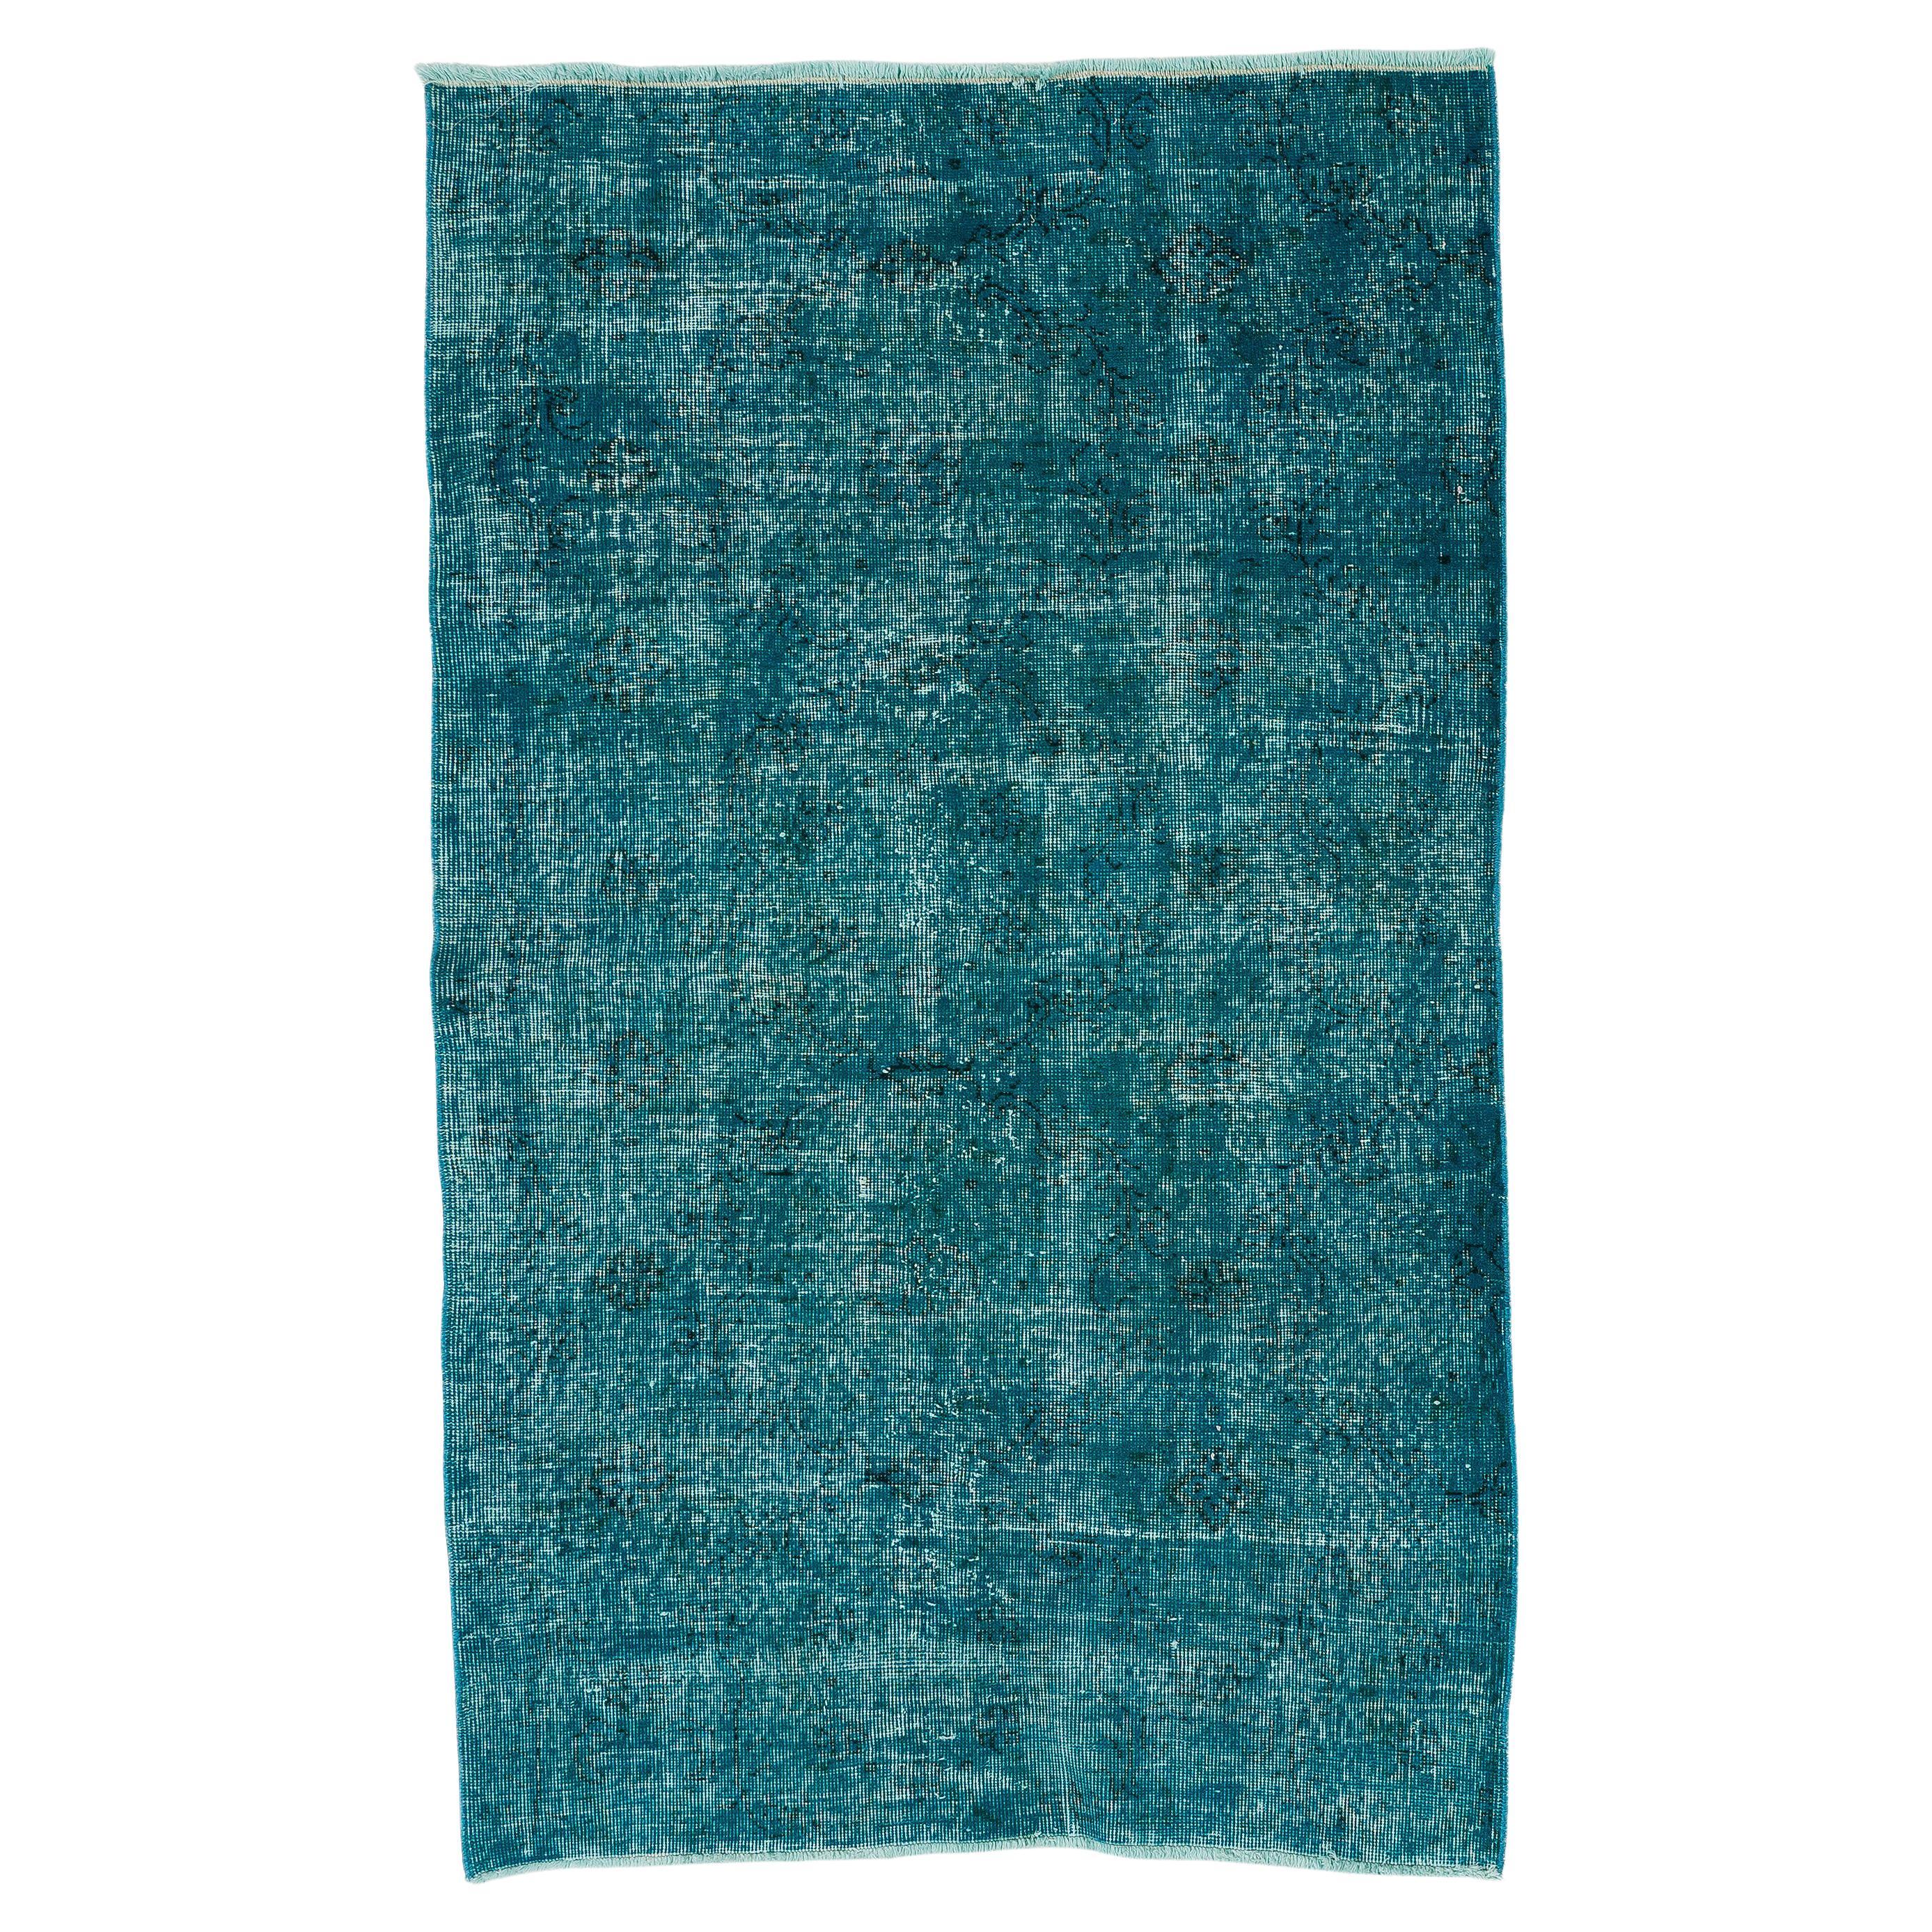 3.8x6.2 ft Vintage Handmade Turkish Accent Rug in Teal Blue for Modern Interiors